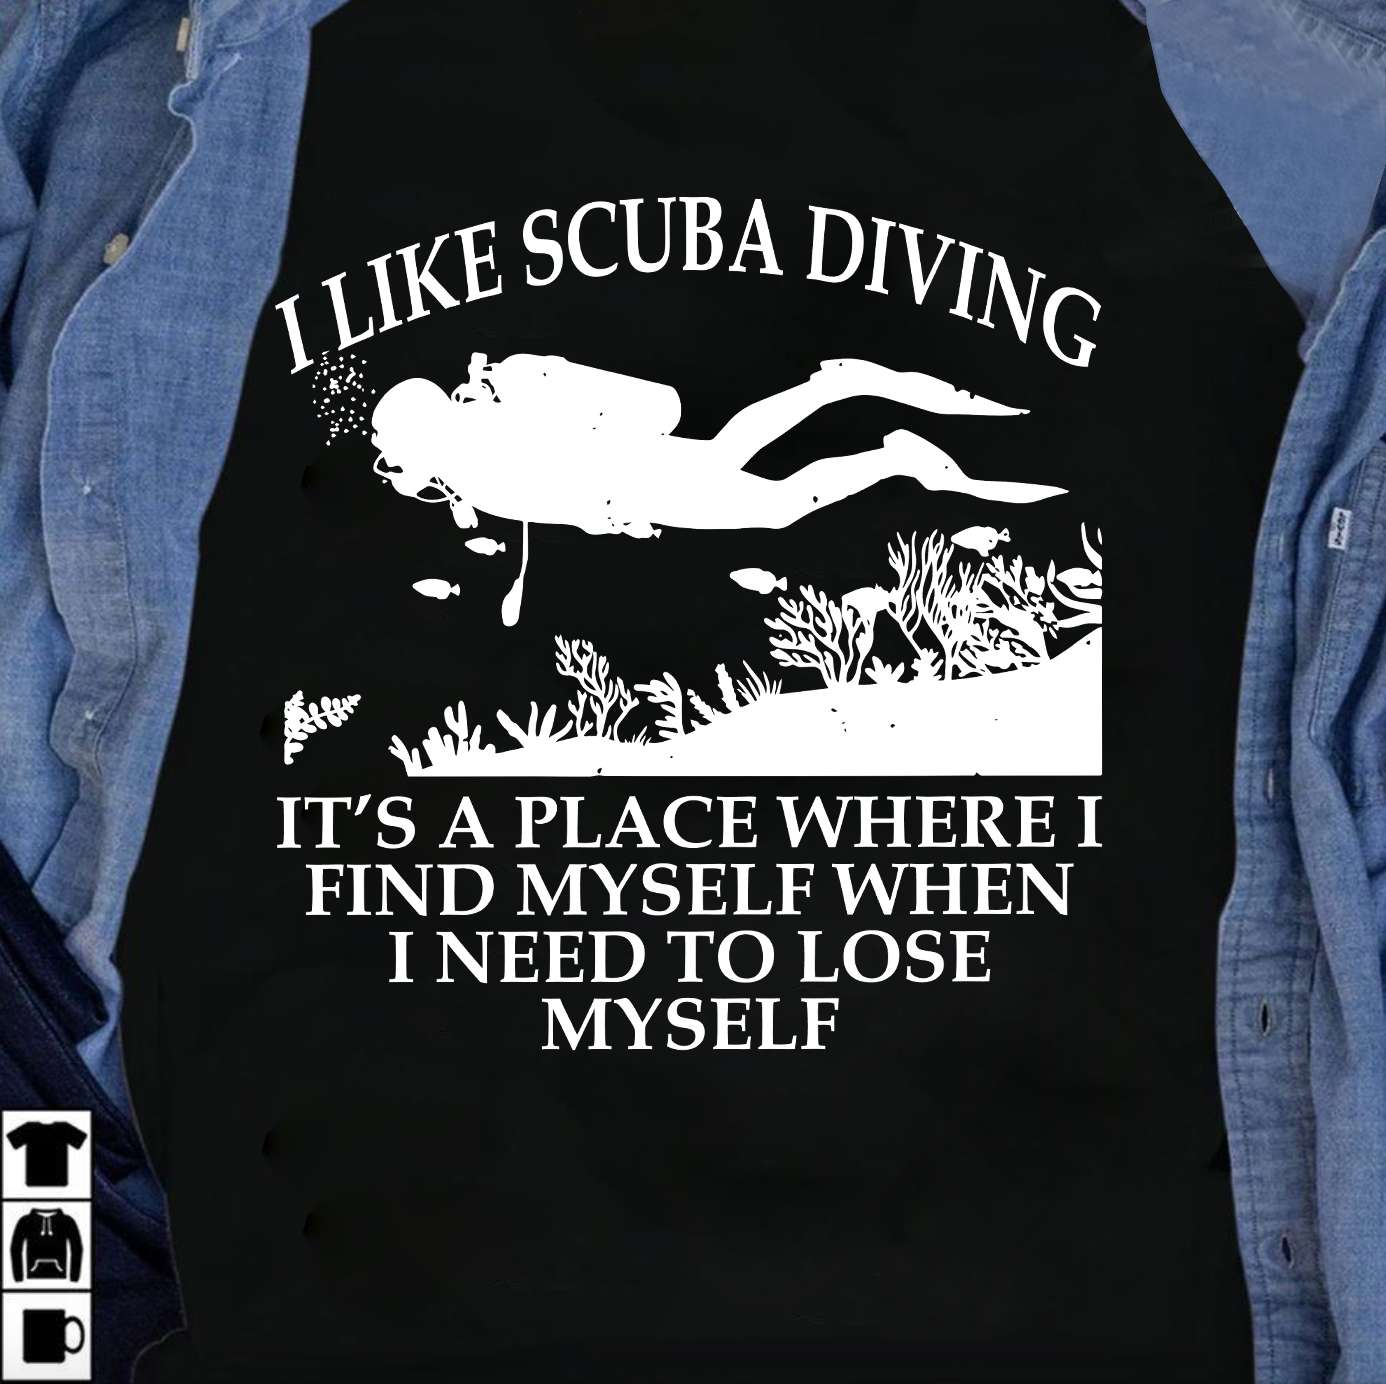 I like scuba diving it's a place where I find myself when I need to lose myself - Scuba diver